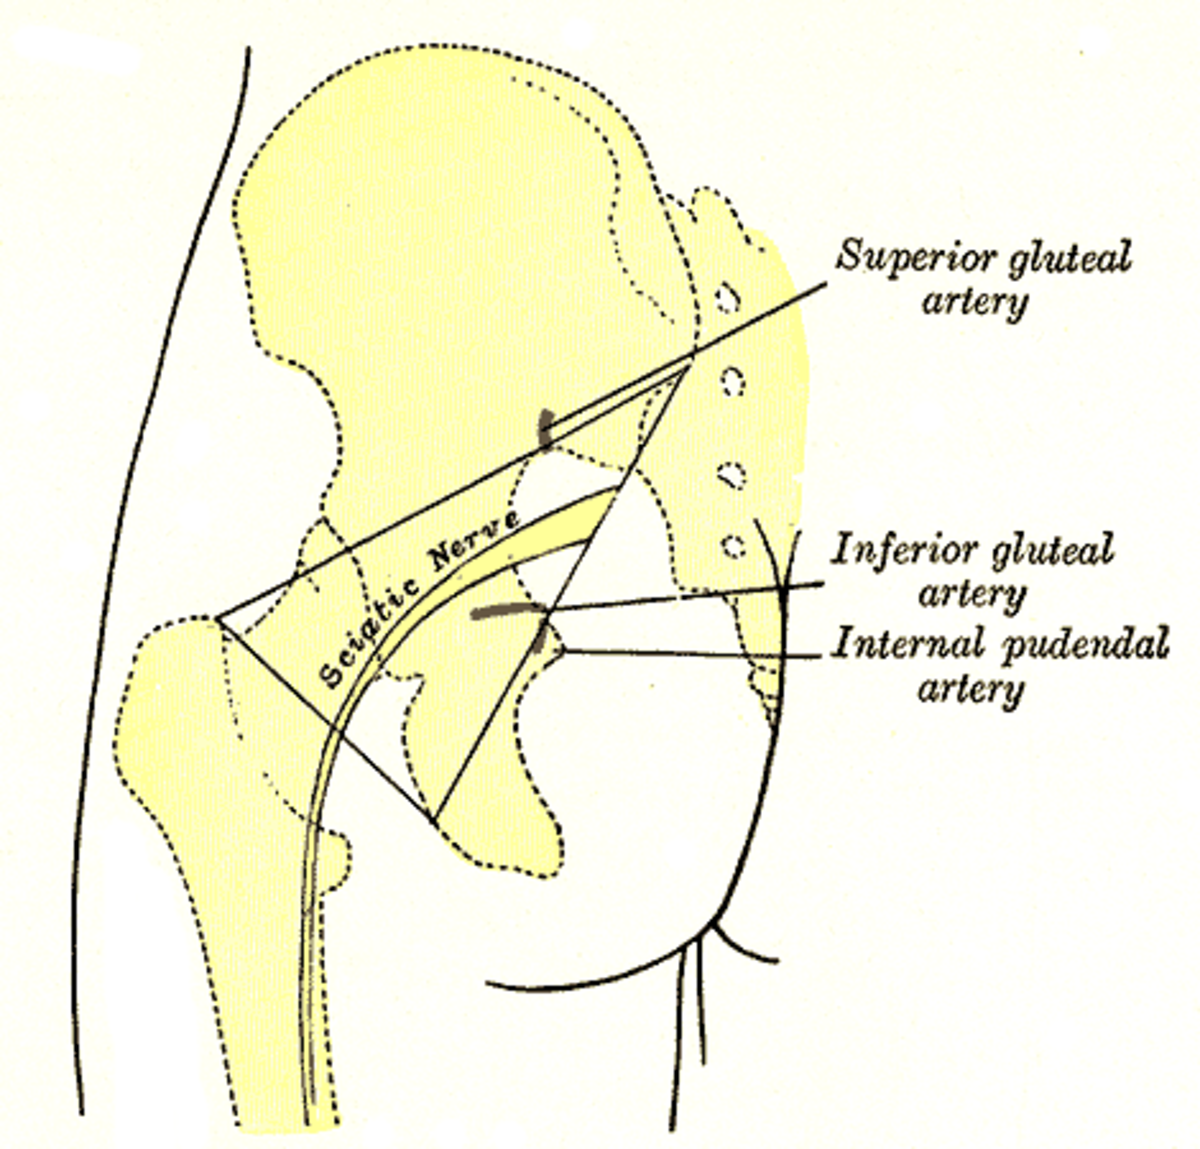 The sciatic nerve. From the 1918 book Gray's Anatomy